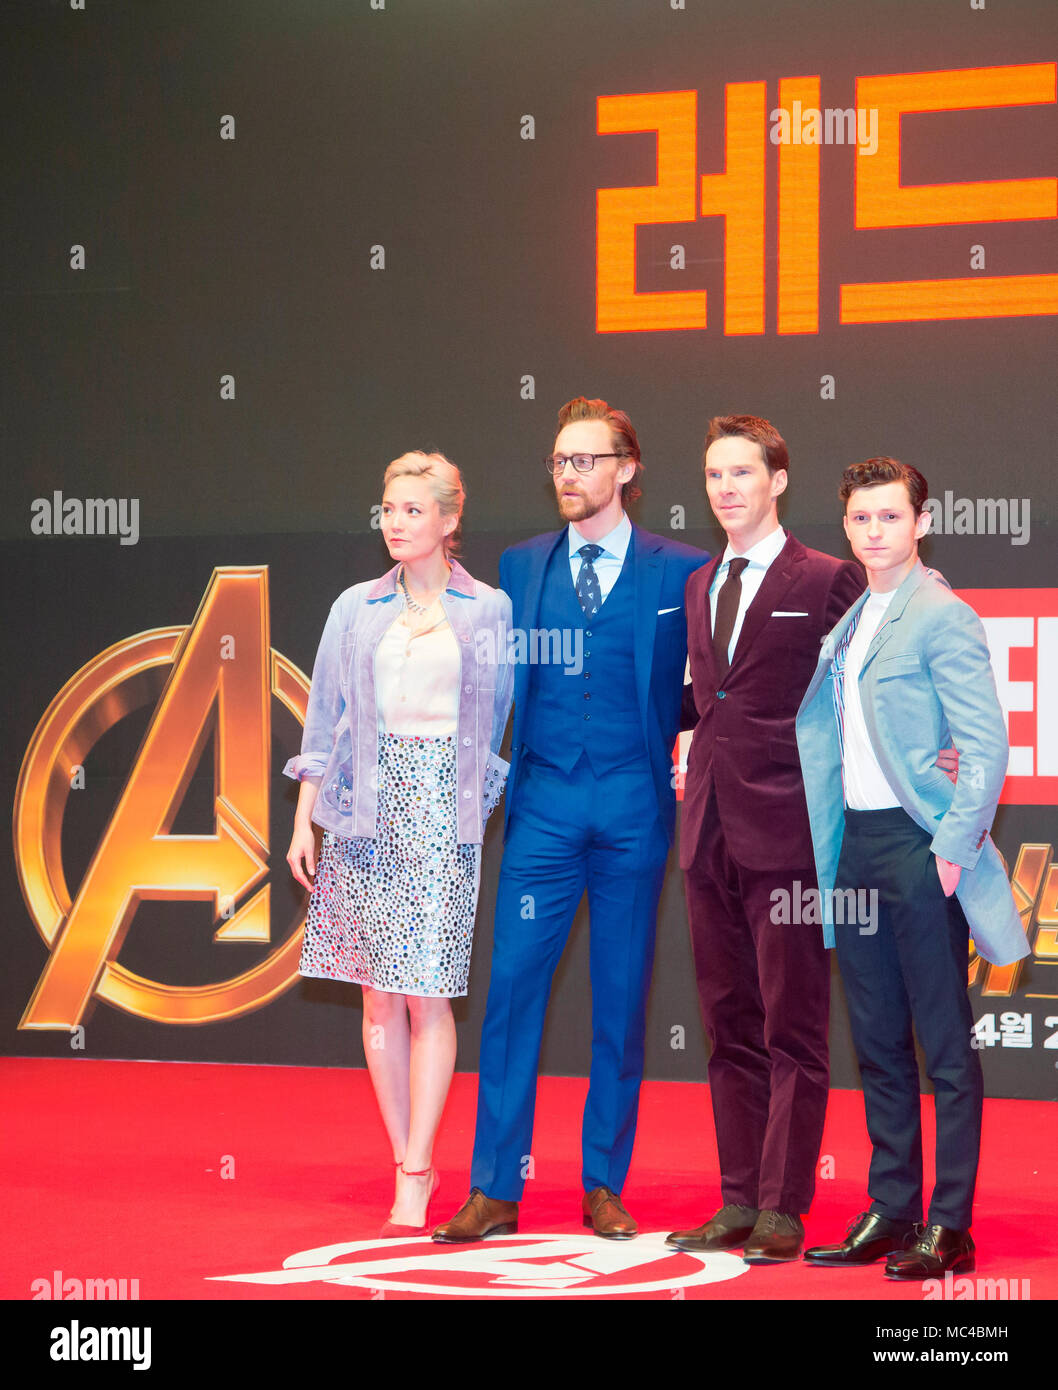 Pom Klementieff, Tom Hiddleston, Benedict Cumberbatch and Tom Holland, Apr  12, 2018 : Cast members of the new movie "Avengers: Infinity War", (L-R)  Pom Klementieff, Tom Hiddleston, Benedict Cumberbatch and Tom Holland